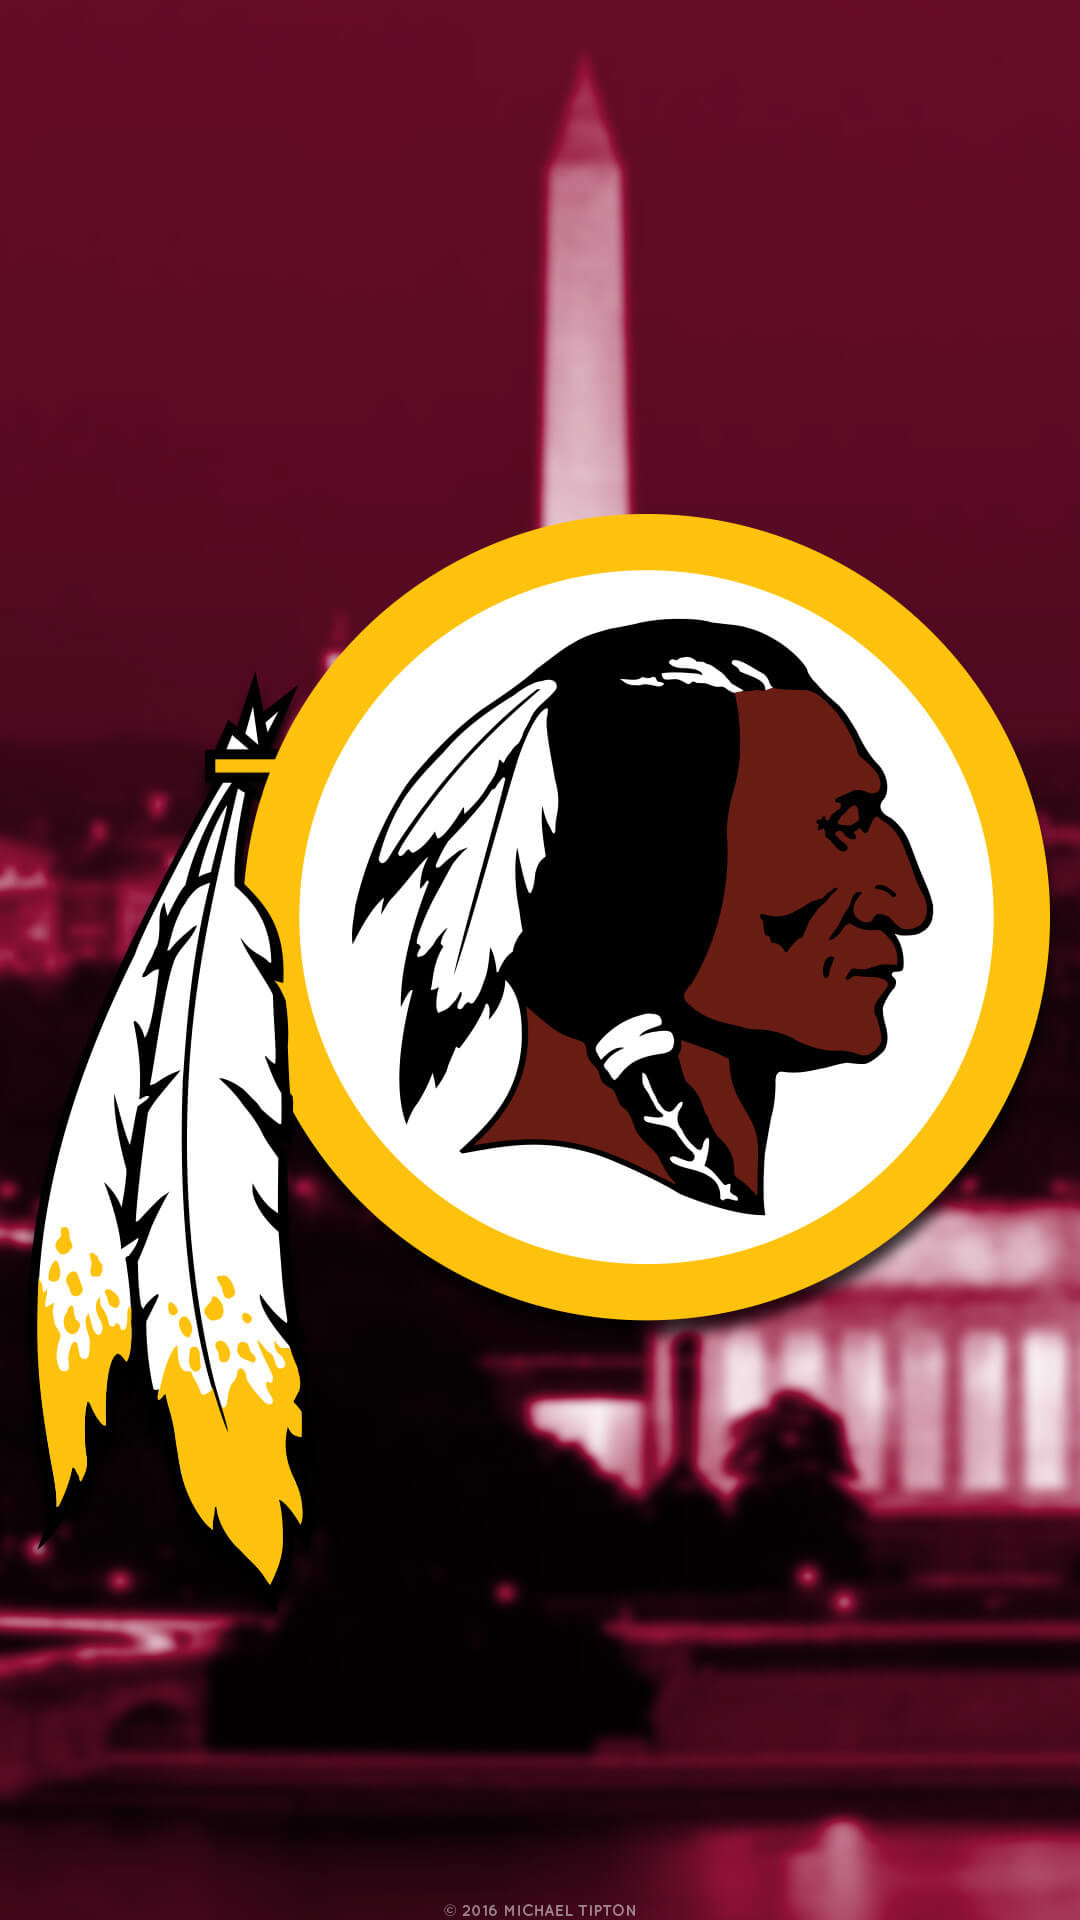 Washington Redskins Live Wallpaper for Android, iPhone